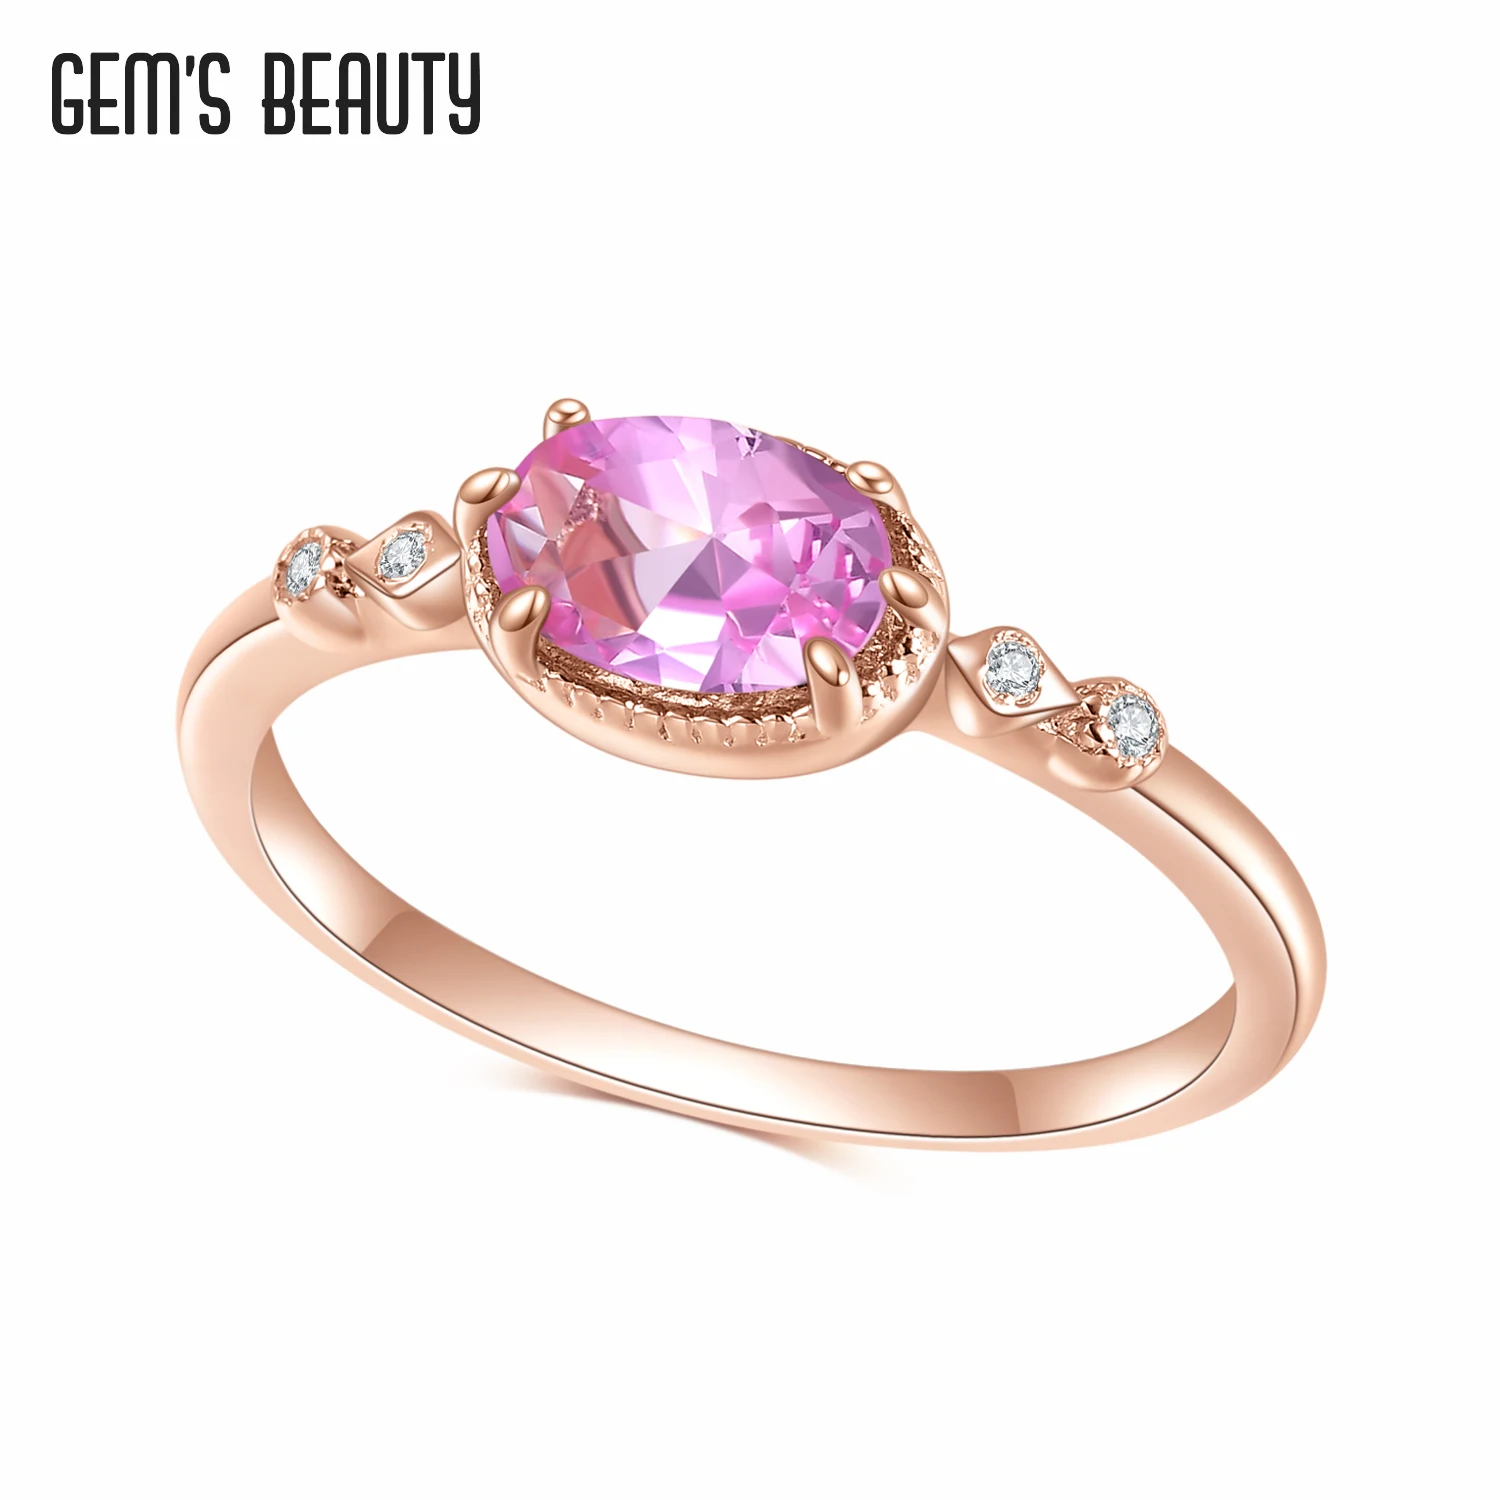 Y 14k rose gold lab pink sapphire rings 925 sterling silver engagement proposal wedding thumb200